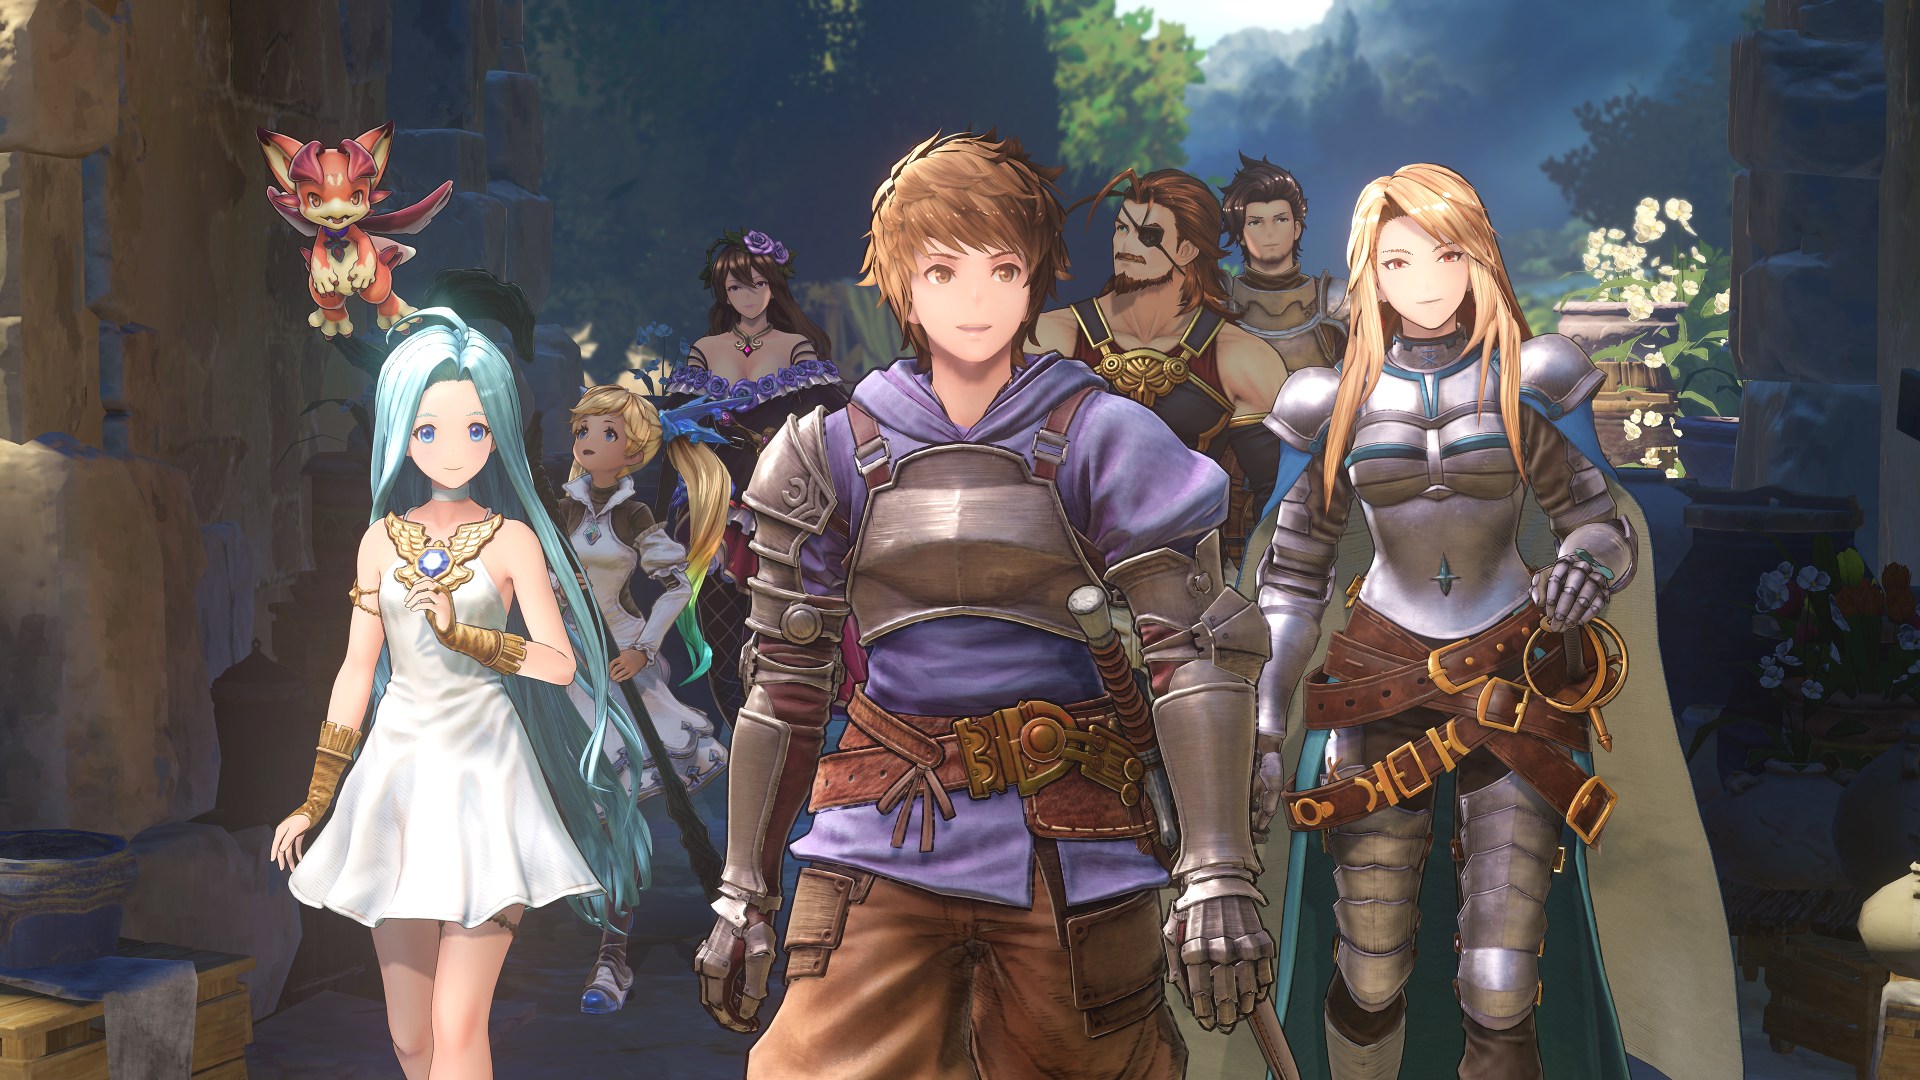 Discover why the latest JRPG release fell short – An enthusiast’s review